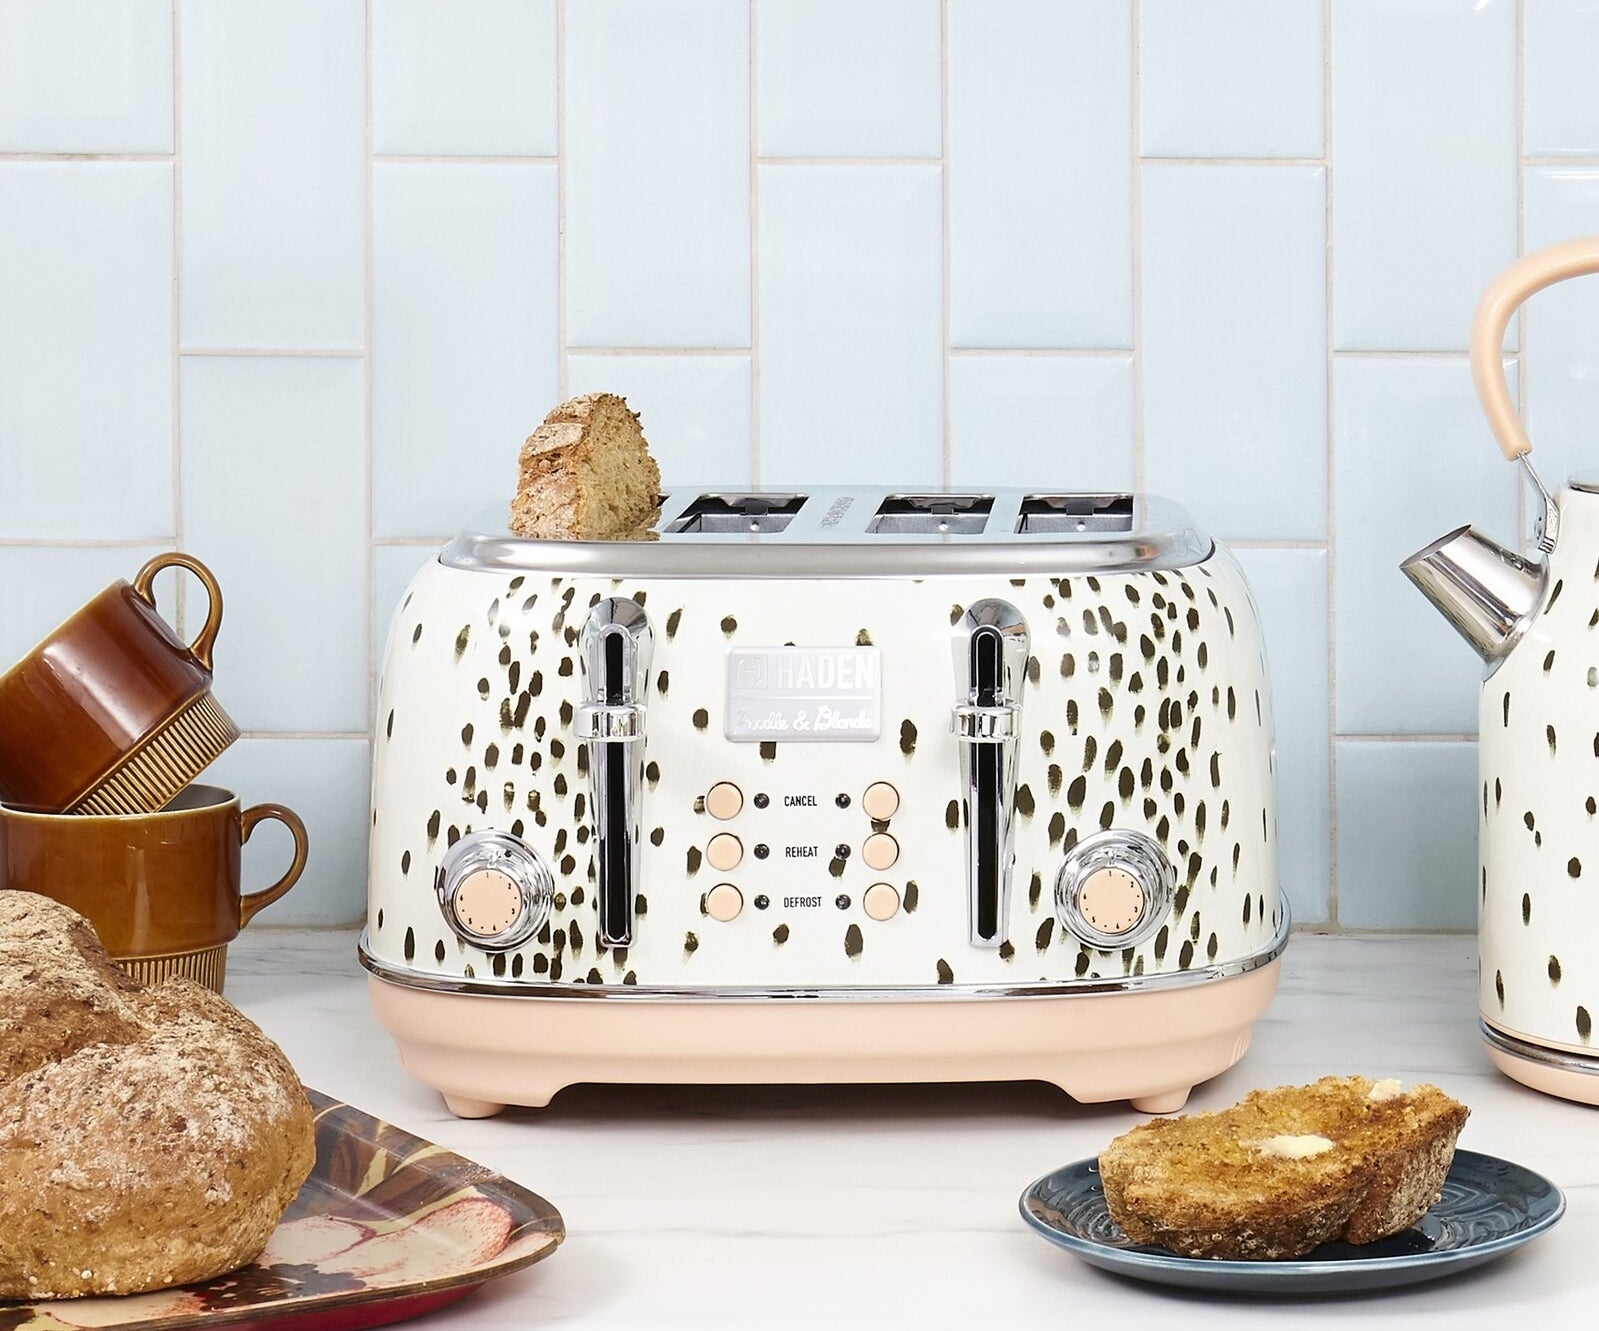 The four-slice toaster which has two dials, six buttons, and a black spotted finish